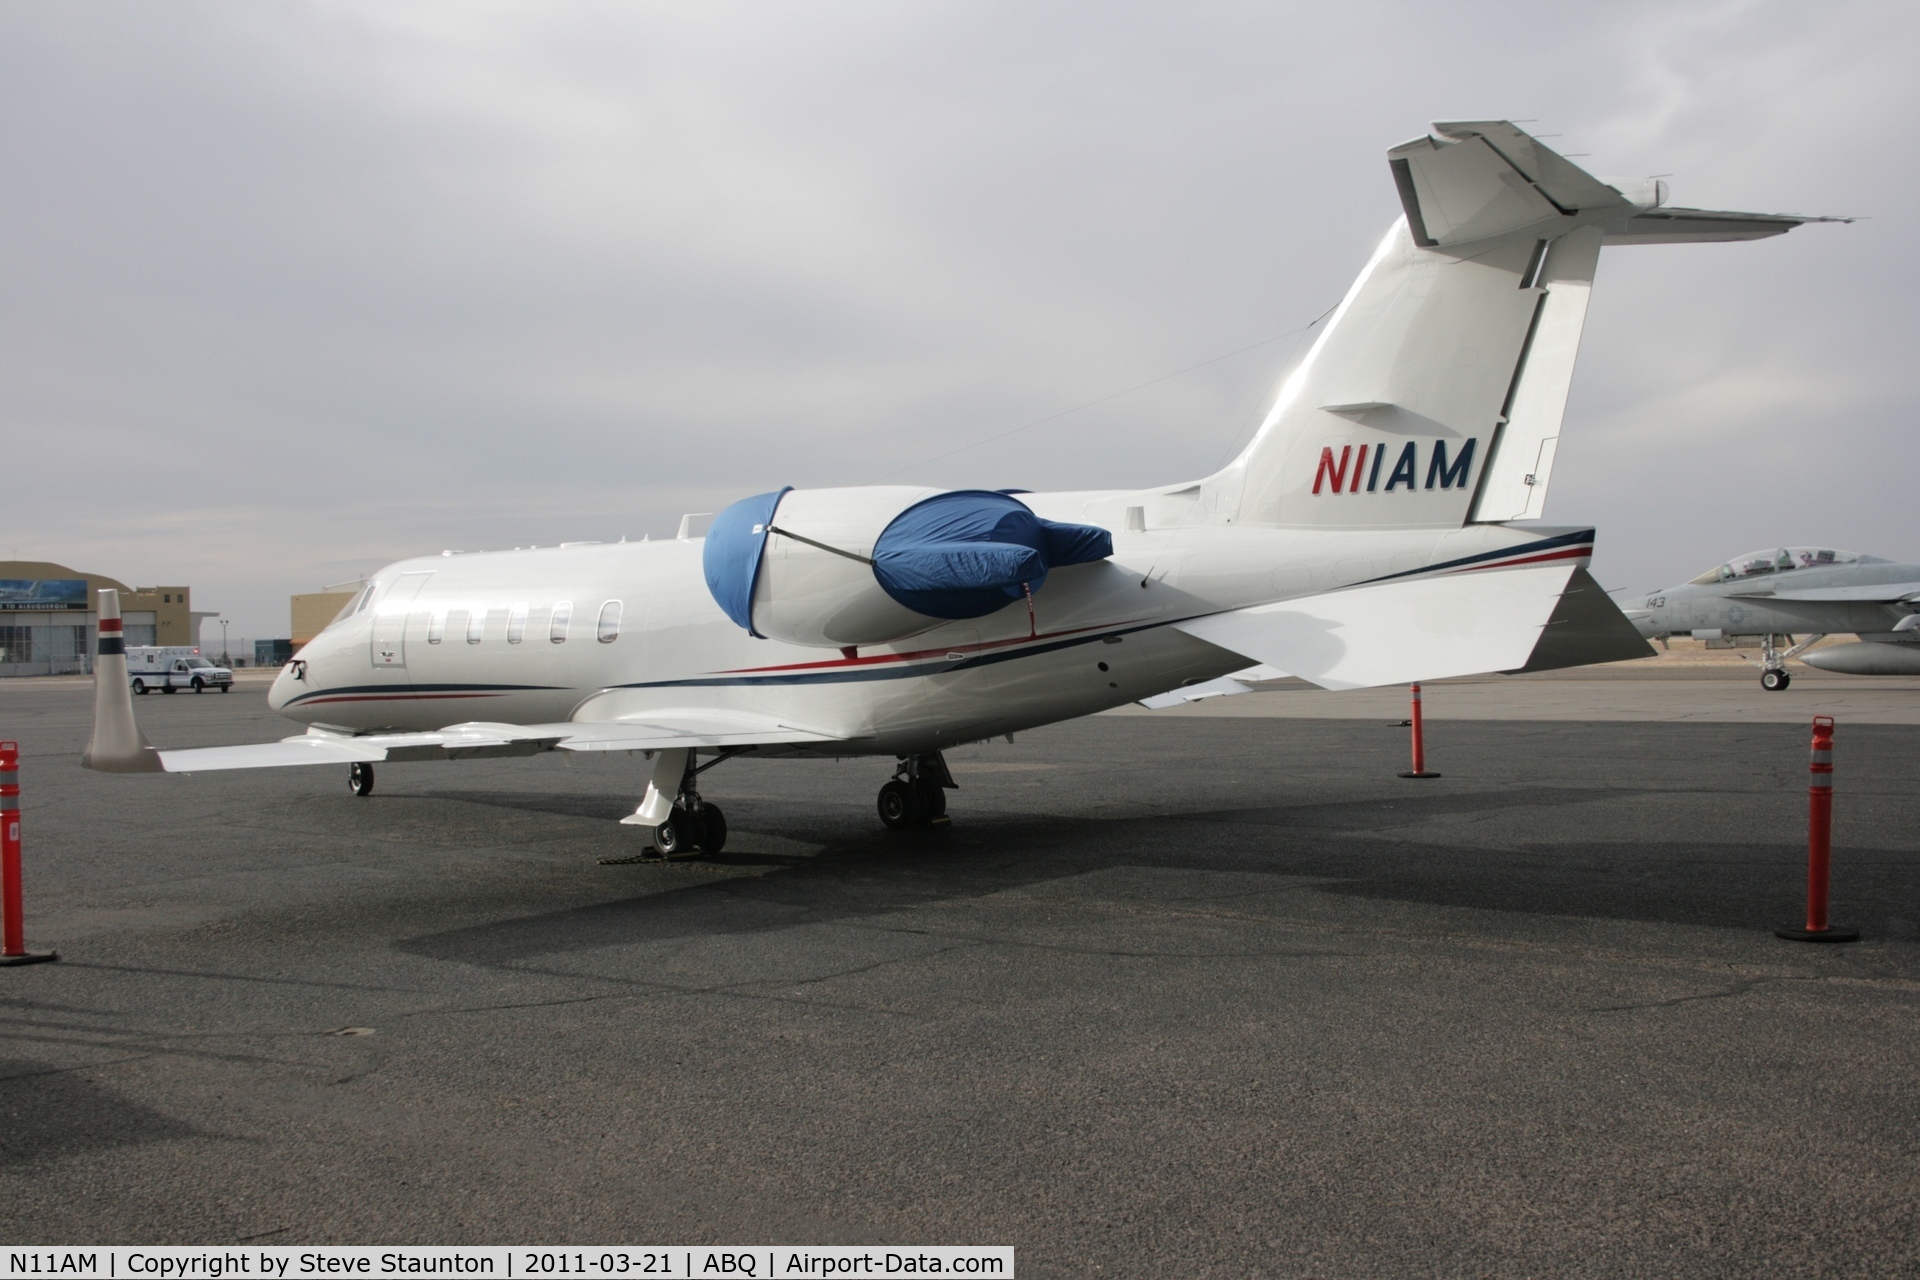 N11AM, 1998 Learjet Inc 60 C/N 60-118, Taken at Alburquerque International Sunport Airport, New Mexico in March 2011 whilst on an Aeroprint Aviation tour